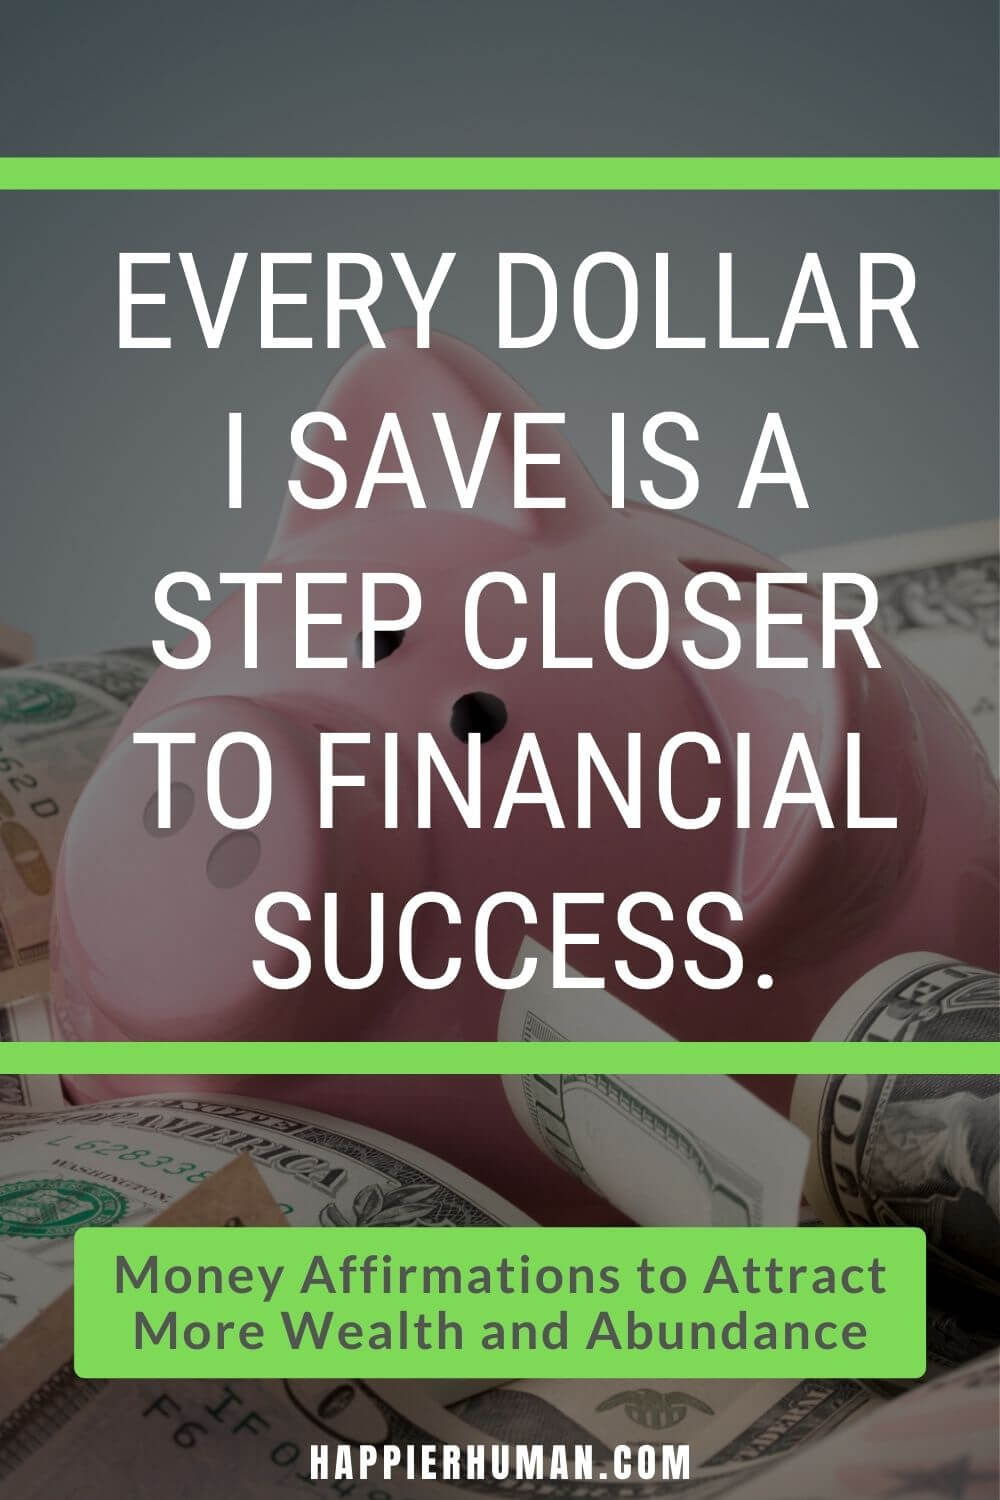 Money Affirmations - Every dollar I save is a step closer to financial success. | money affirmations wallpaper | money affirmations that work fast | money affirmations youtube